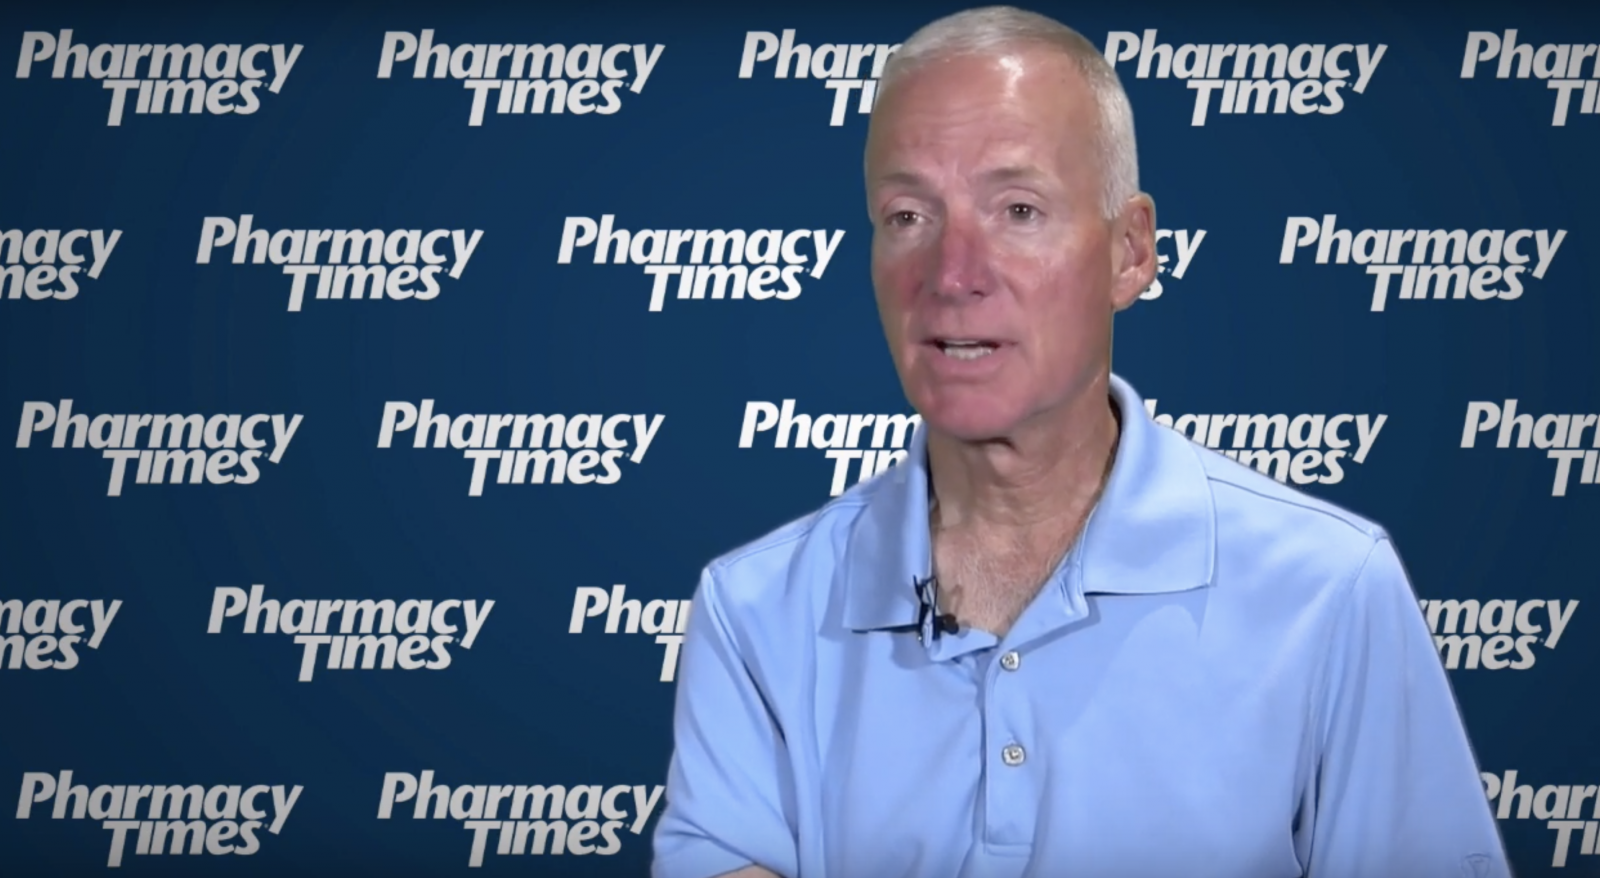 How a Pharmacy Background Can Help with Drug Abuse Prevention